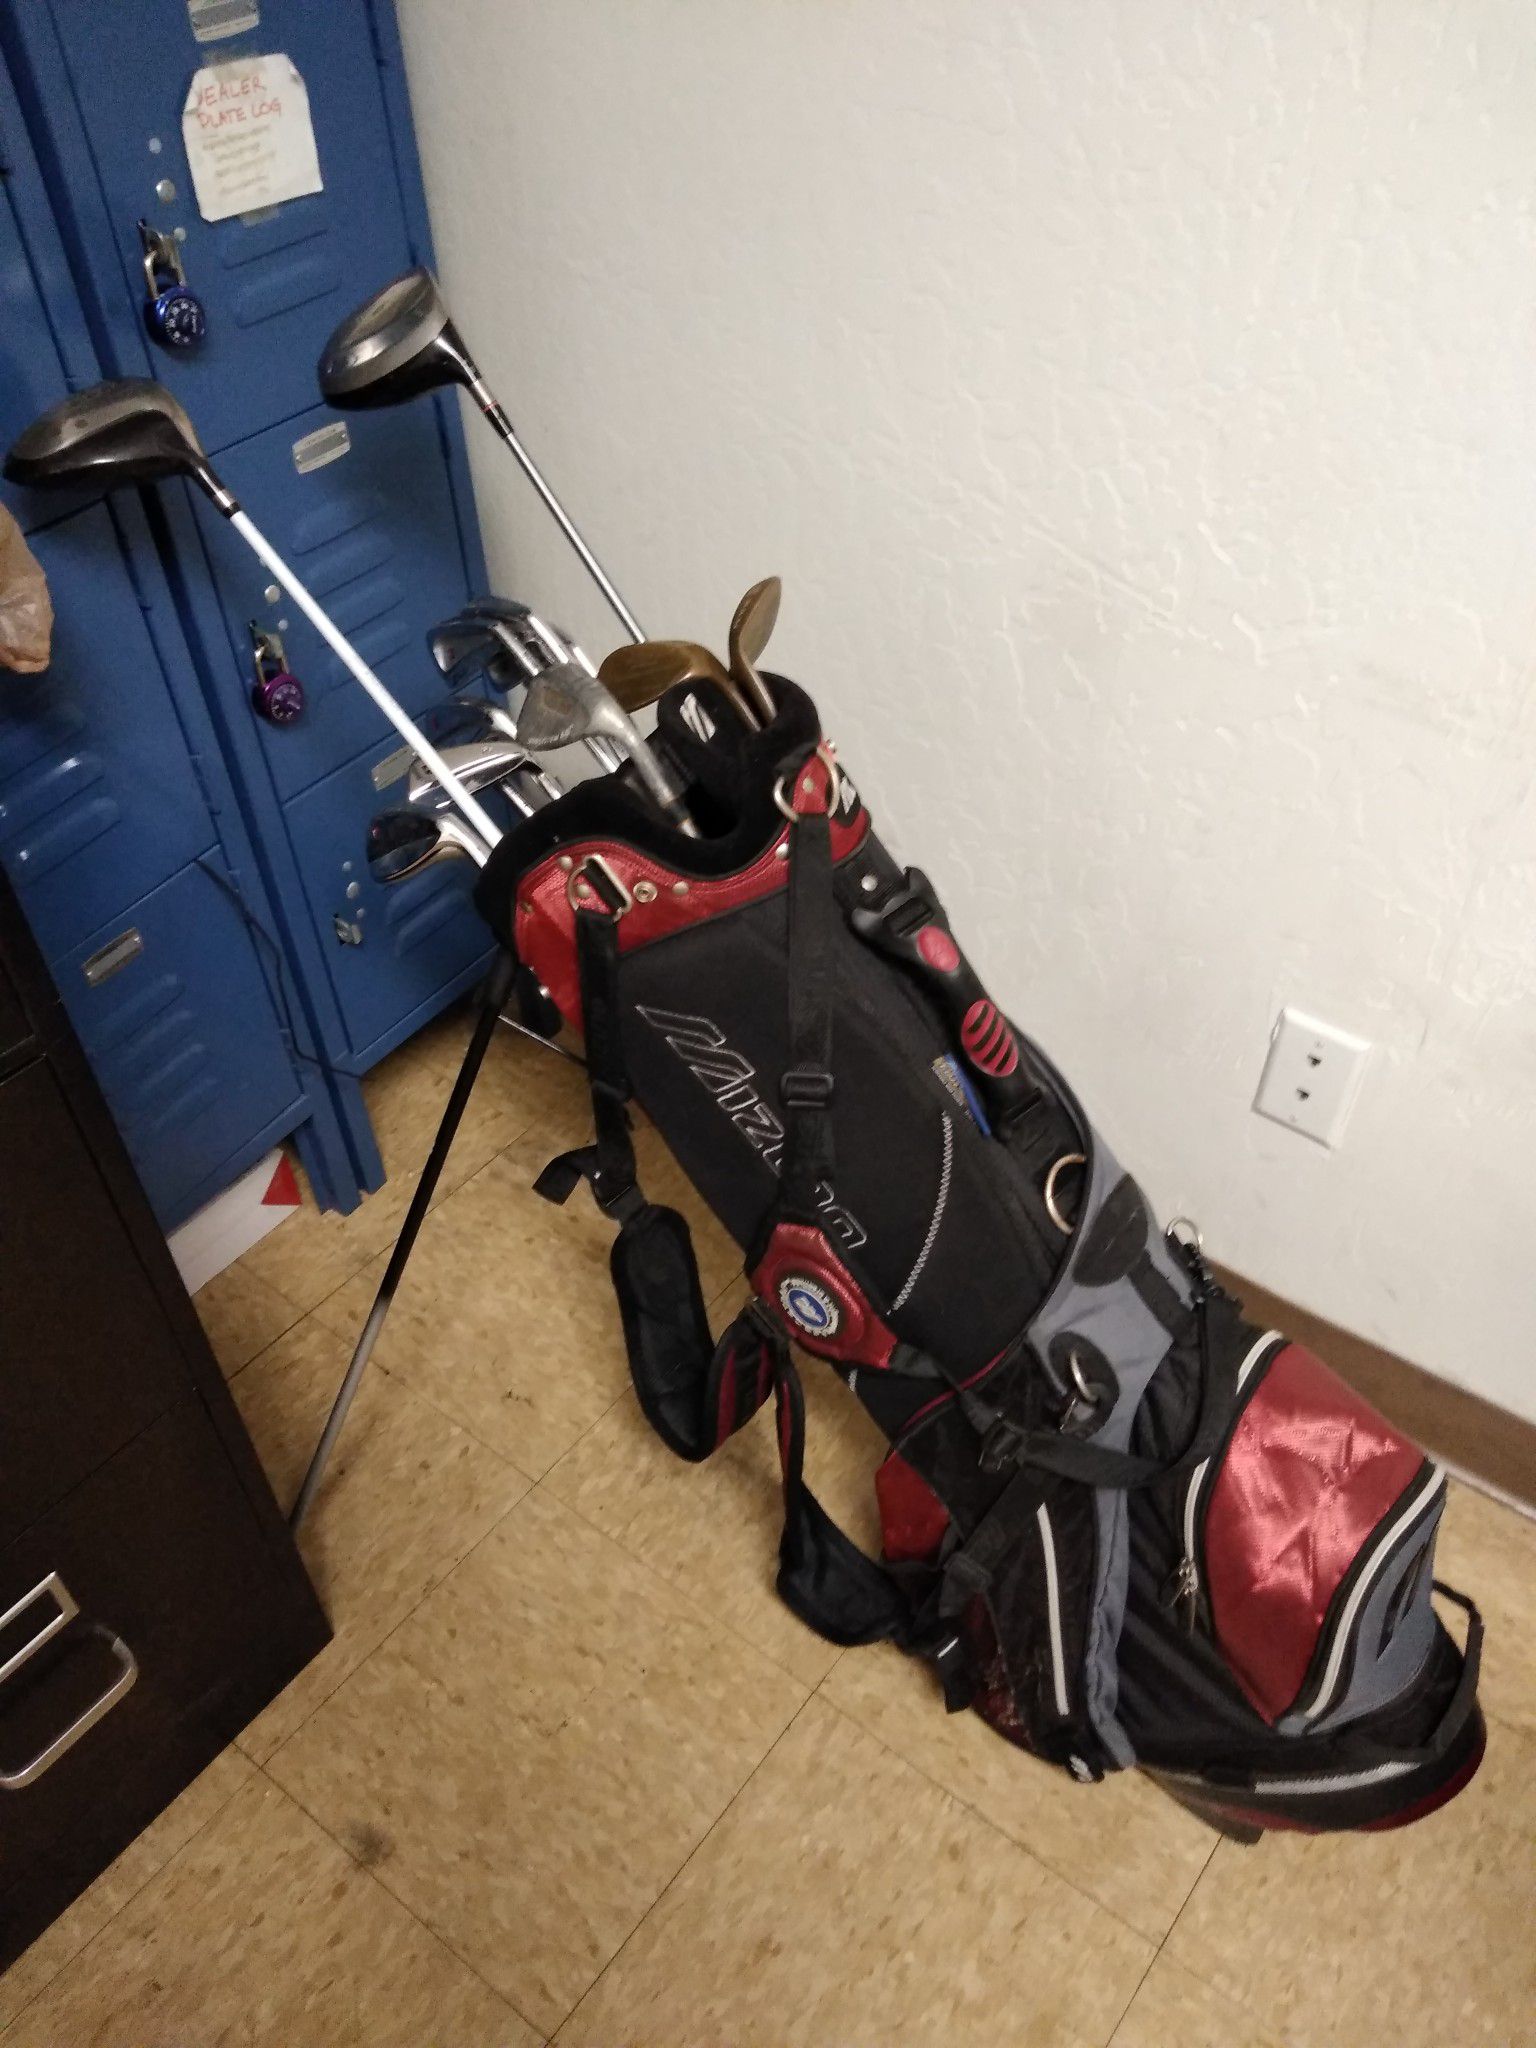 Set of Golf clubs with bag